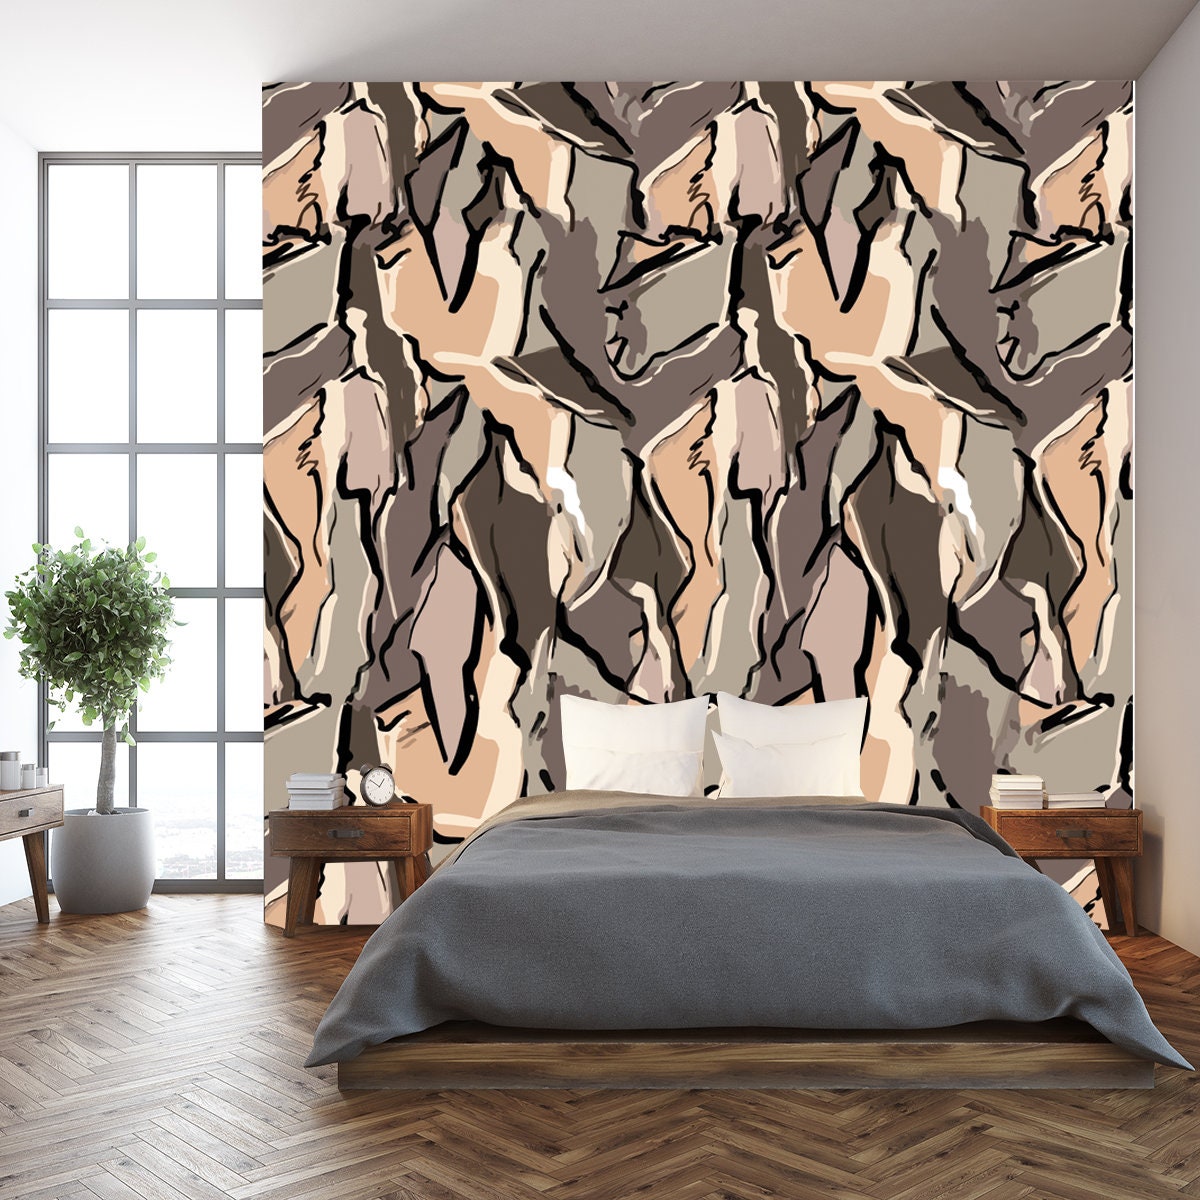 Ethnic Colored Bohemian Pattern, Geometric Elements, African Mud Cloth Wallpaper Bedroom Mural